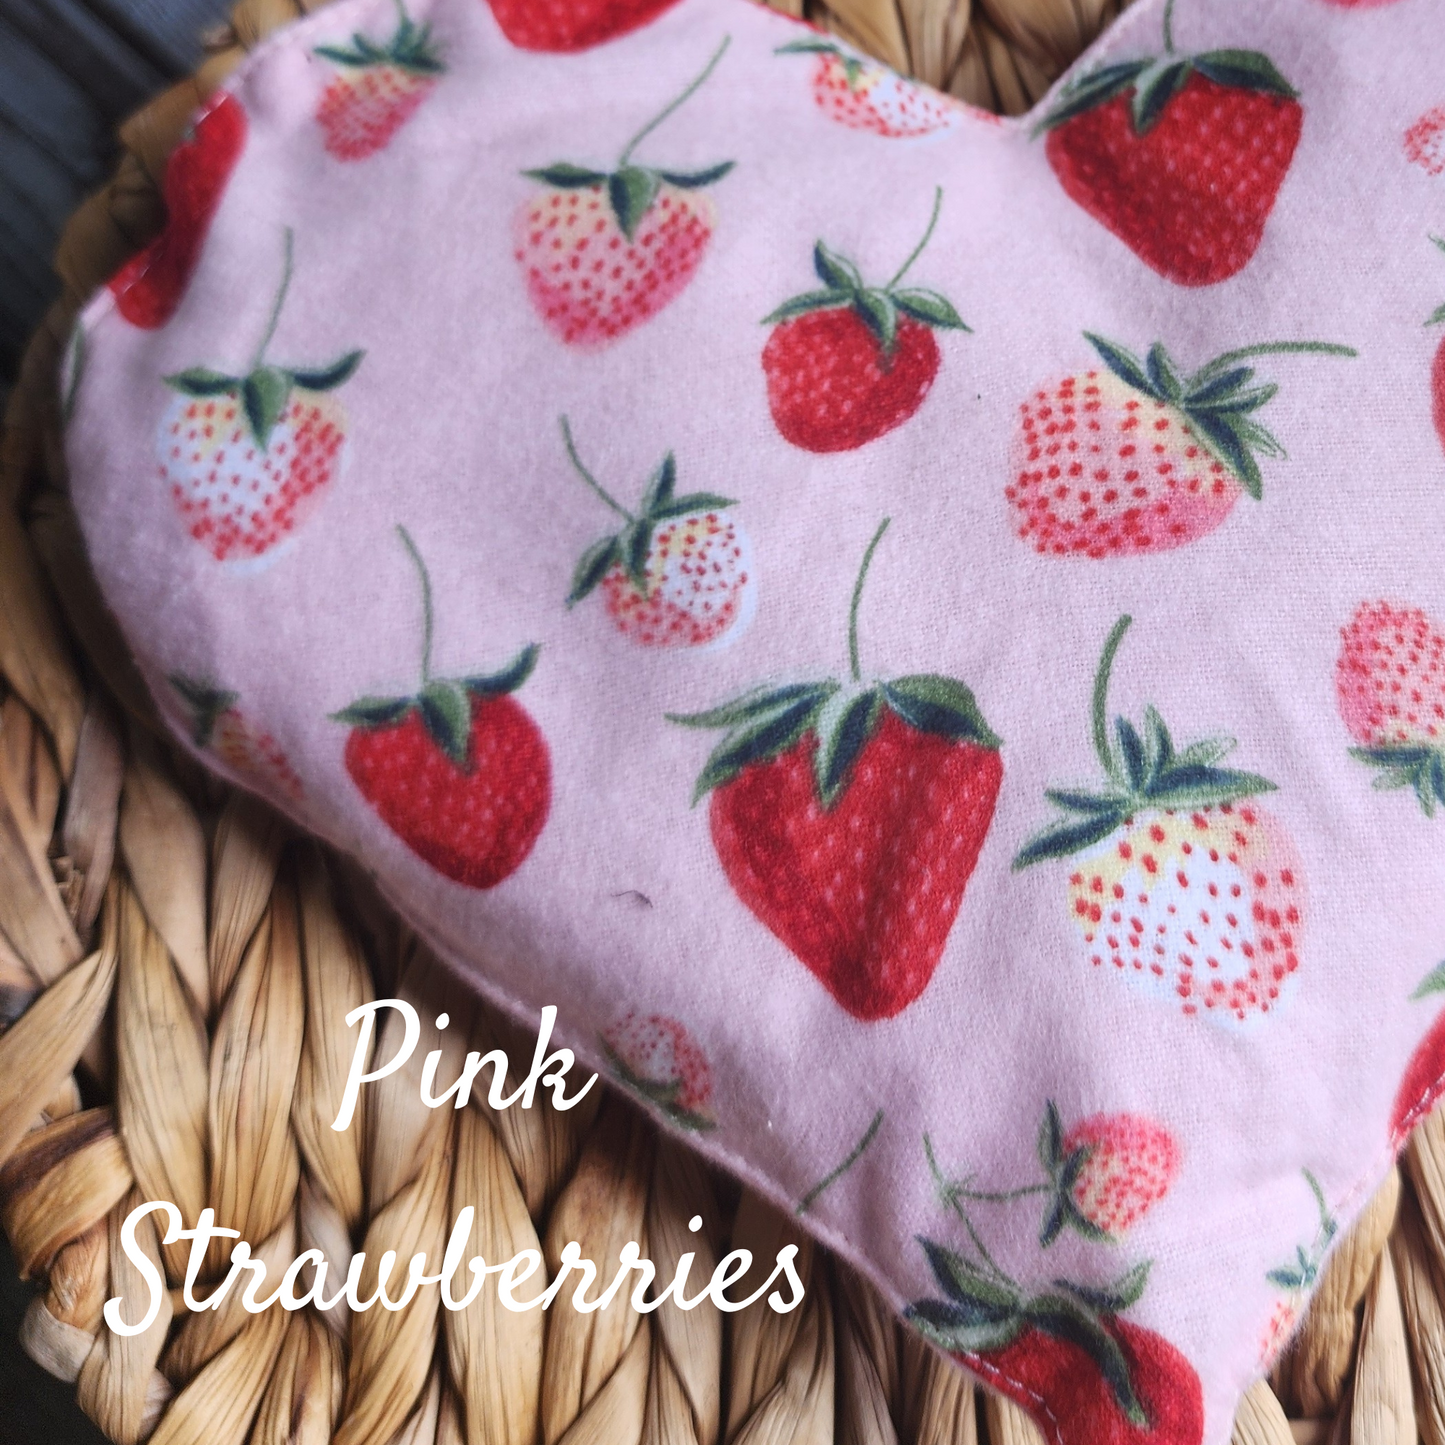 Aromatherapy Hot/Cold Weighted Neck Wraps - Super Snuggle Strawberry Flannel